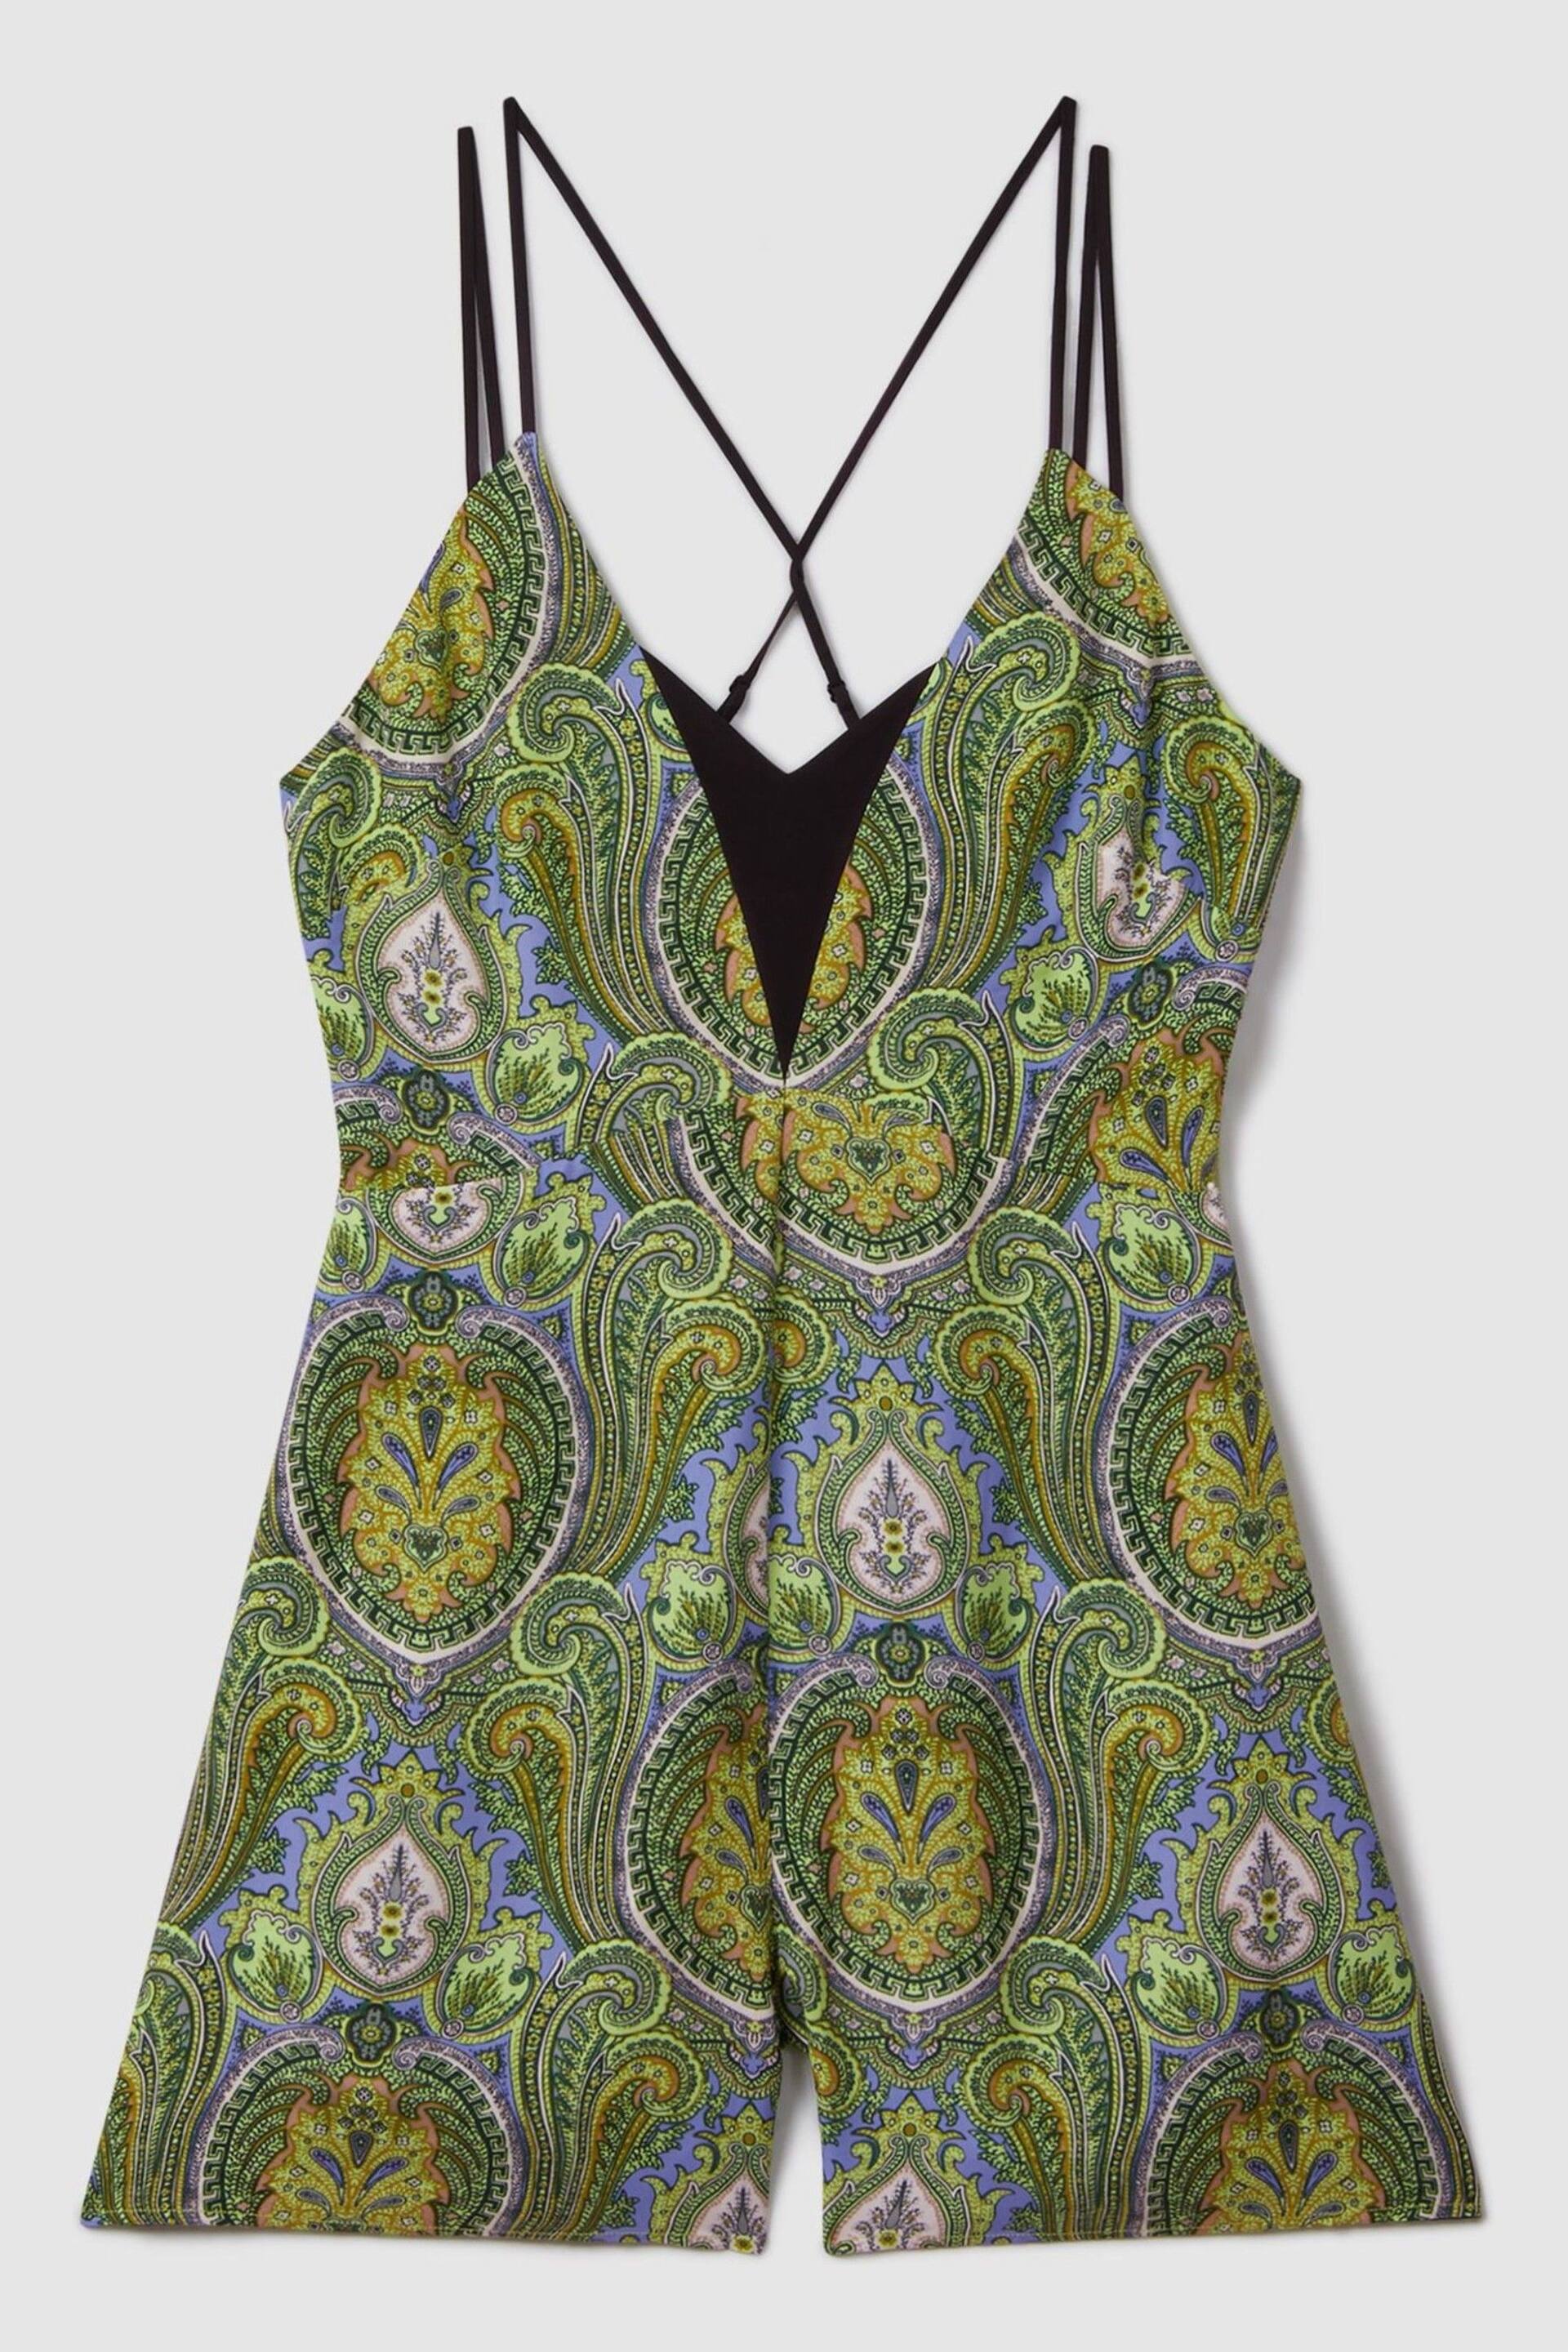 Florere Printed Dual Strap Playsuit - Image 2 of 6